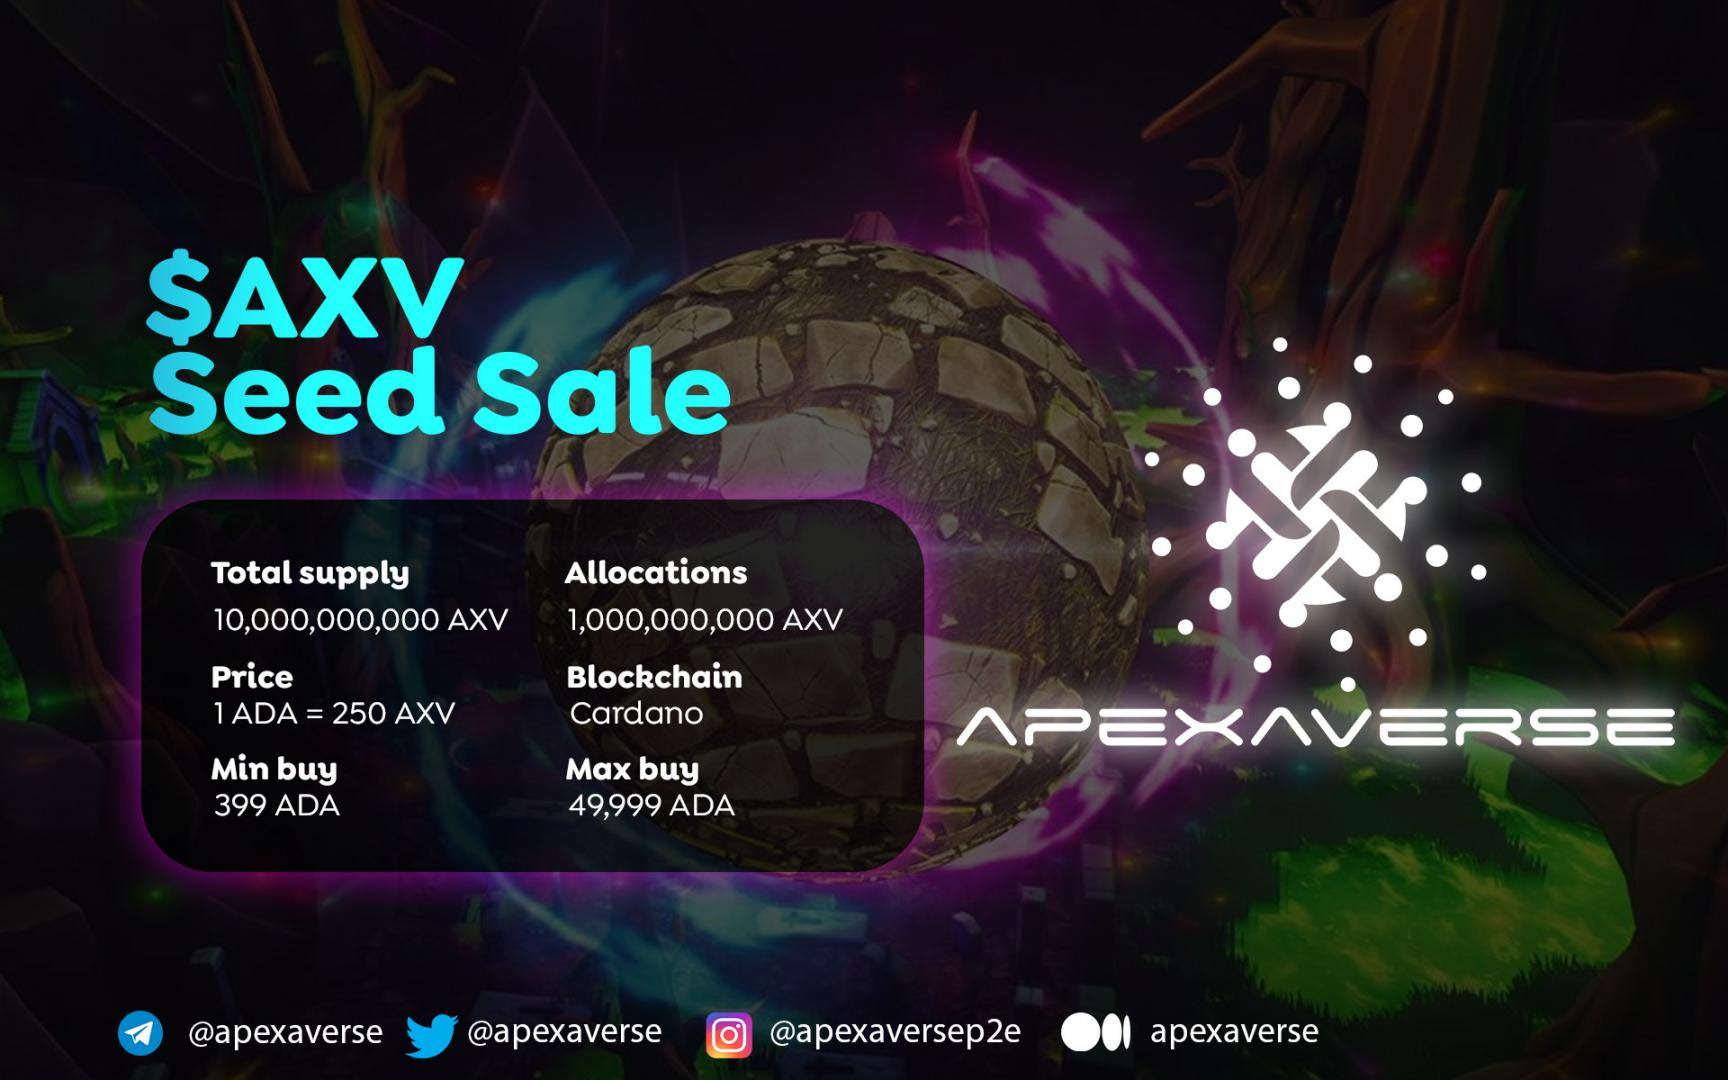 Apexaverse Launches Token Sale Ahead of Game Trailer Release